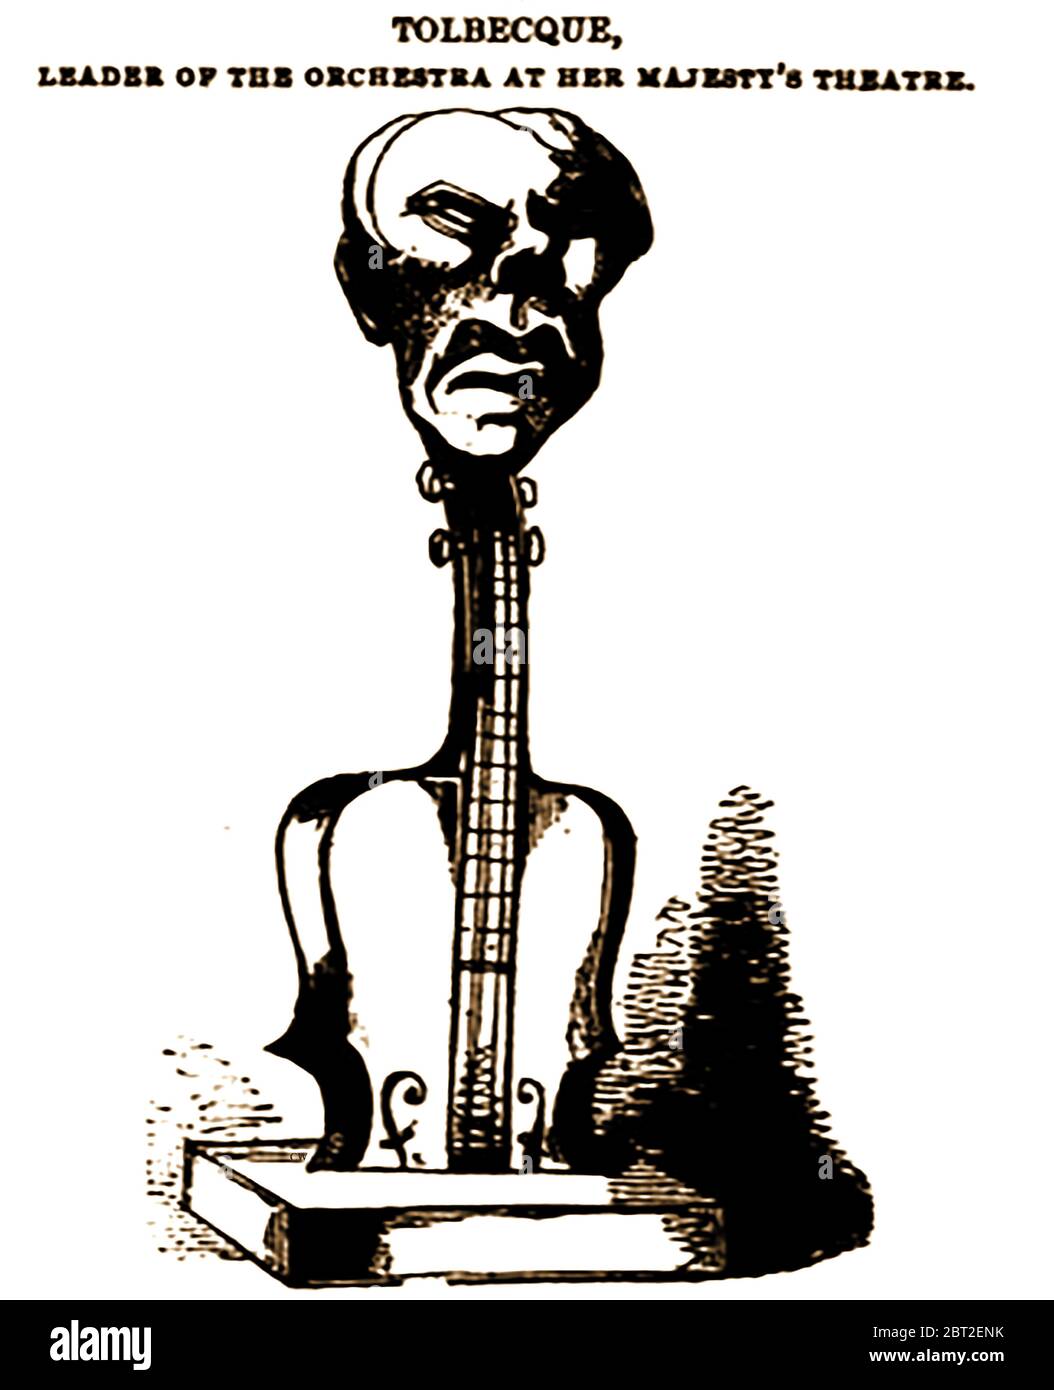 A musical caricature portrait of Tolbecque leader of the orchestra at Her Majesty's Theatre, London in 1842 . August-Joseph Tolbecque (1801-1869) was a Belgian-French musician who played violin and viola. He   was a pupil of Kreutzer at the Paris Cons. where he won the premier Prix (1821). He was also  member of the Opera orchestra and played in the Société des Concerts du Conservatoire; subsequently  at Her Majesty’s Theatre in London, England. Stock Photo